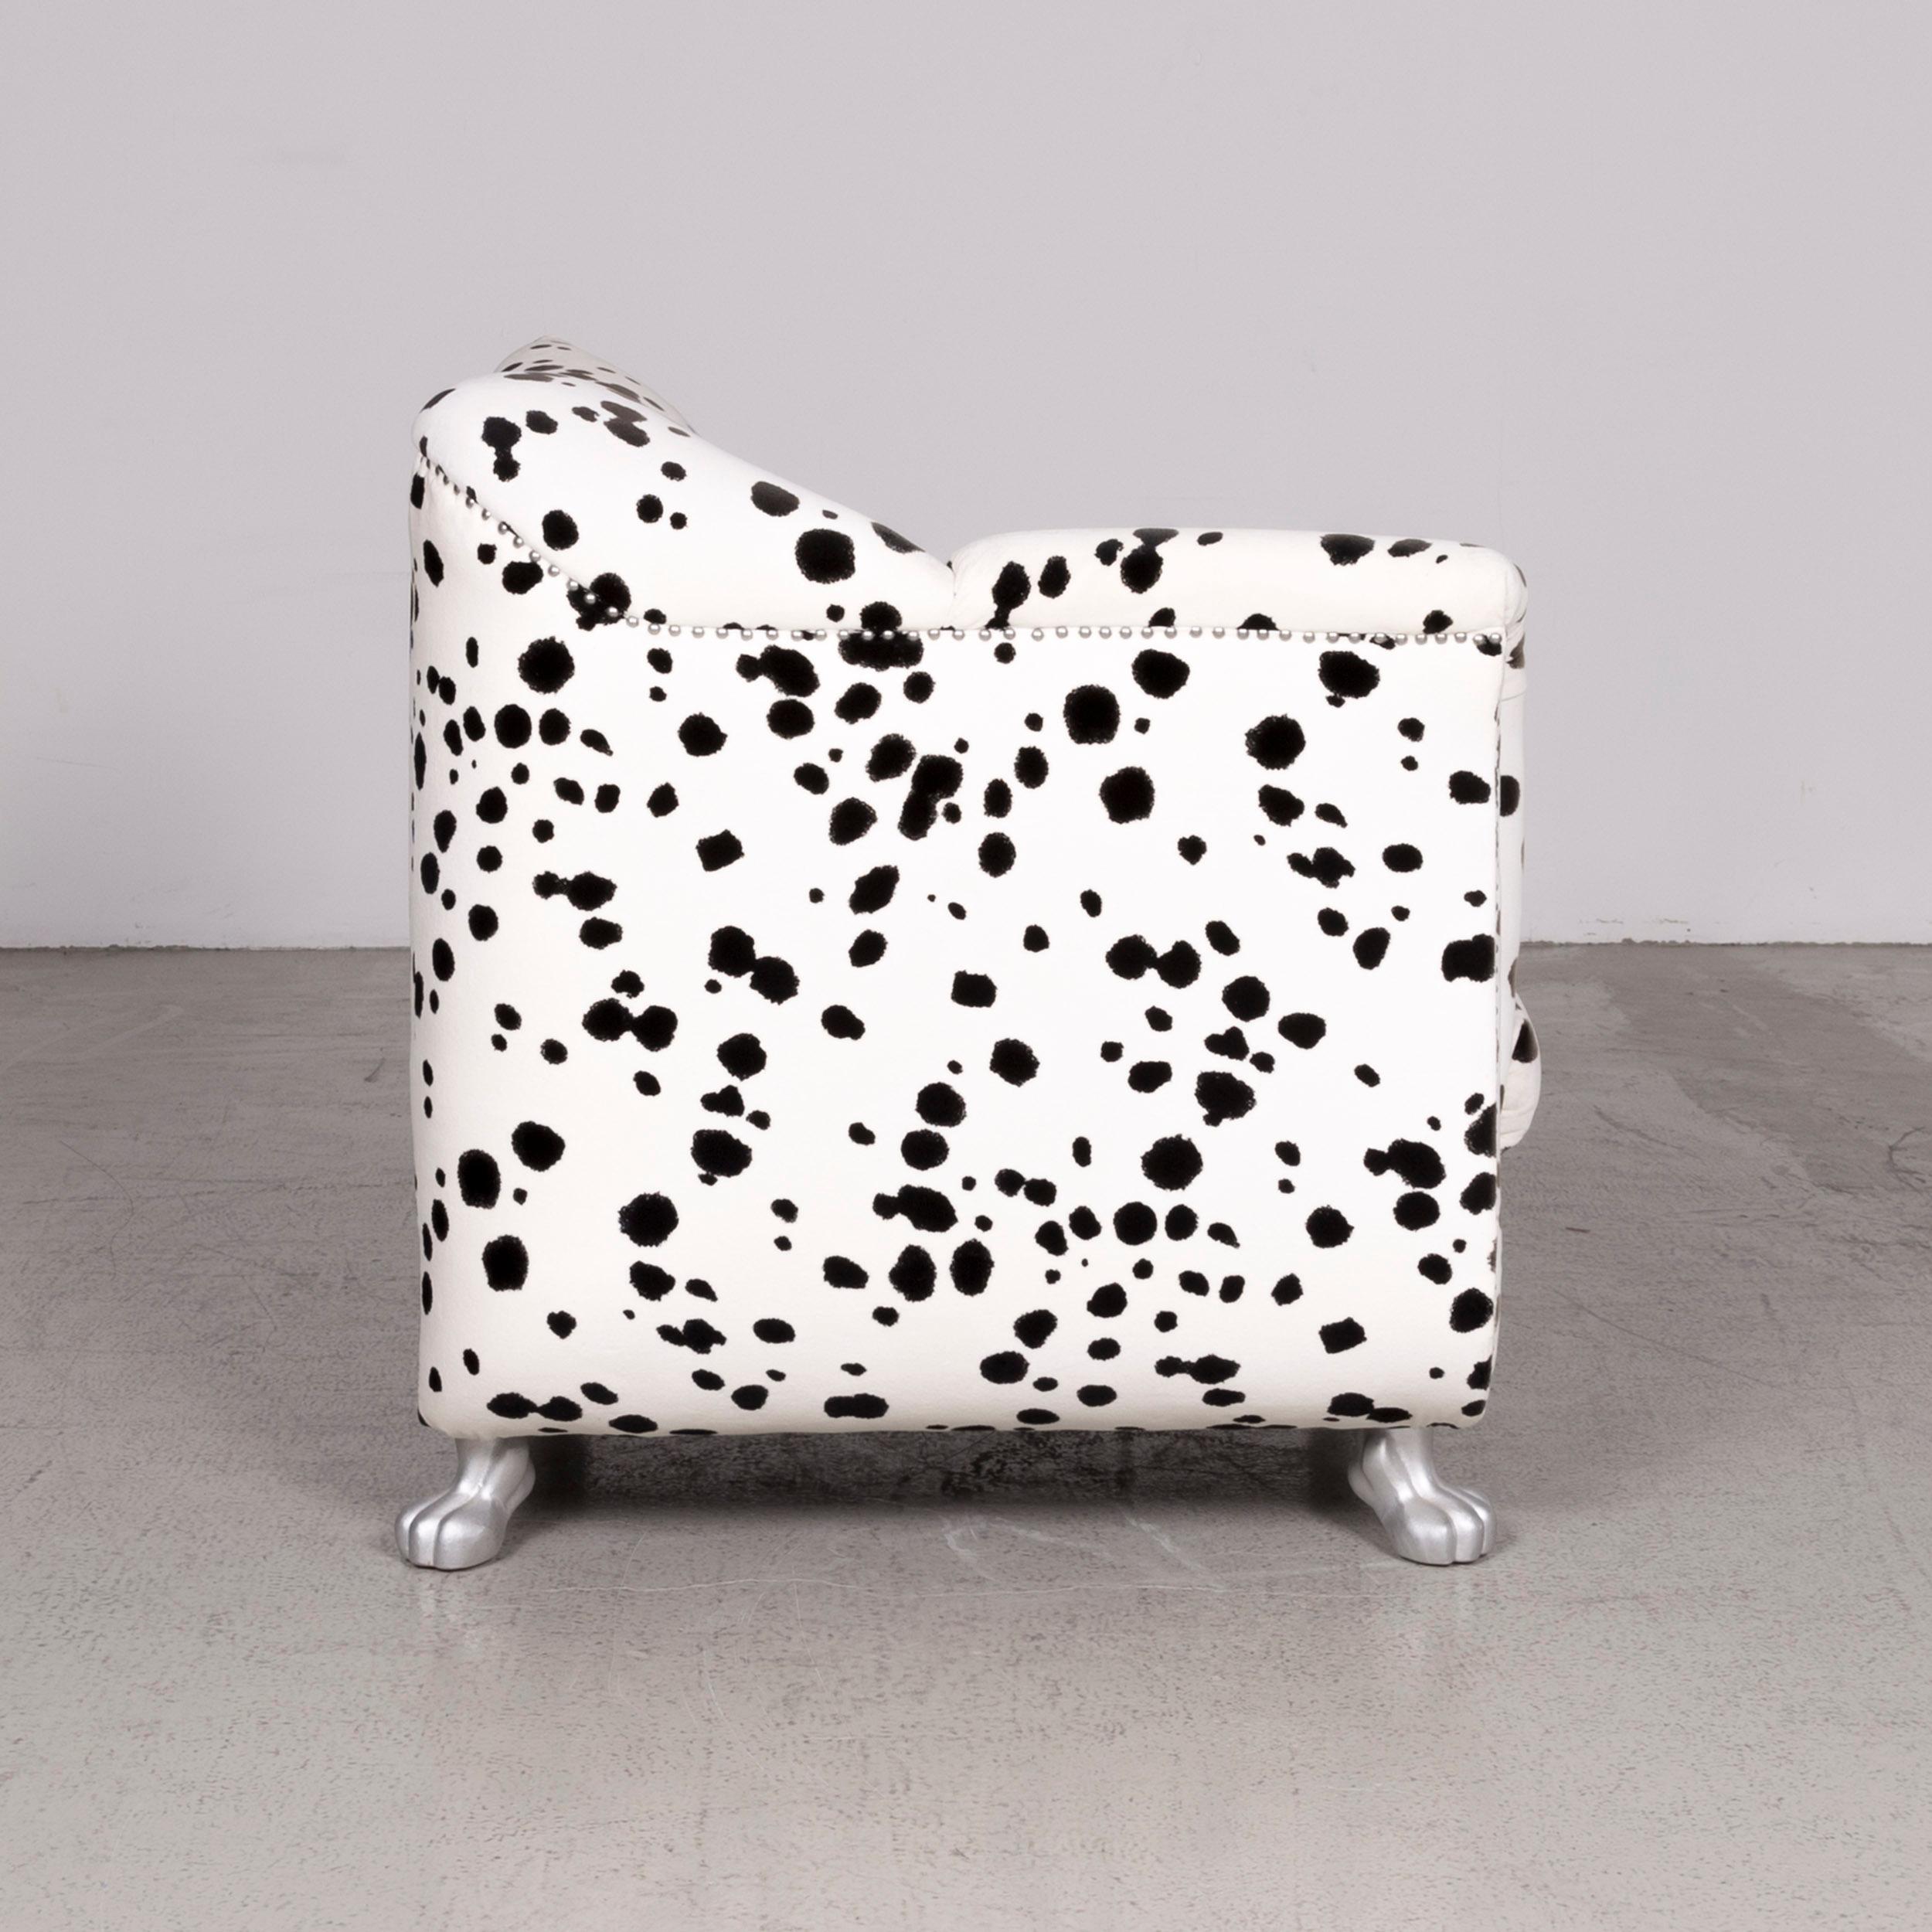 Contemporary Bretz Gaudi Designer Fabric Armchair White Dalmatian Pattern Chair with Stool For Sale